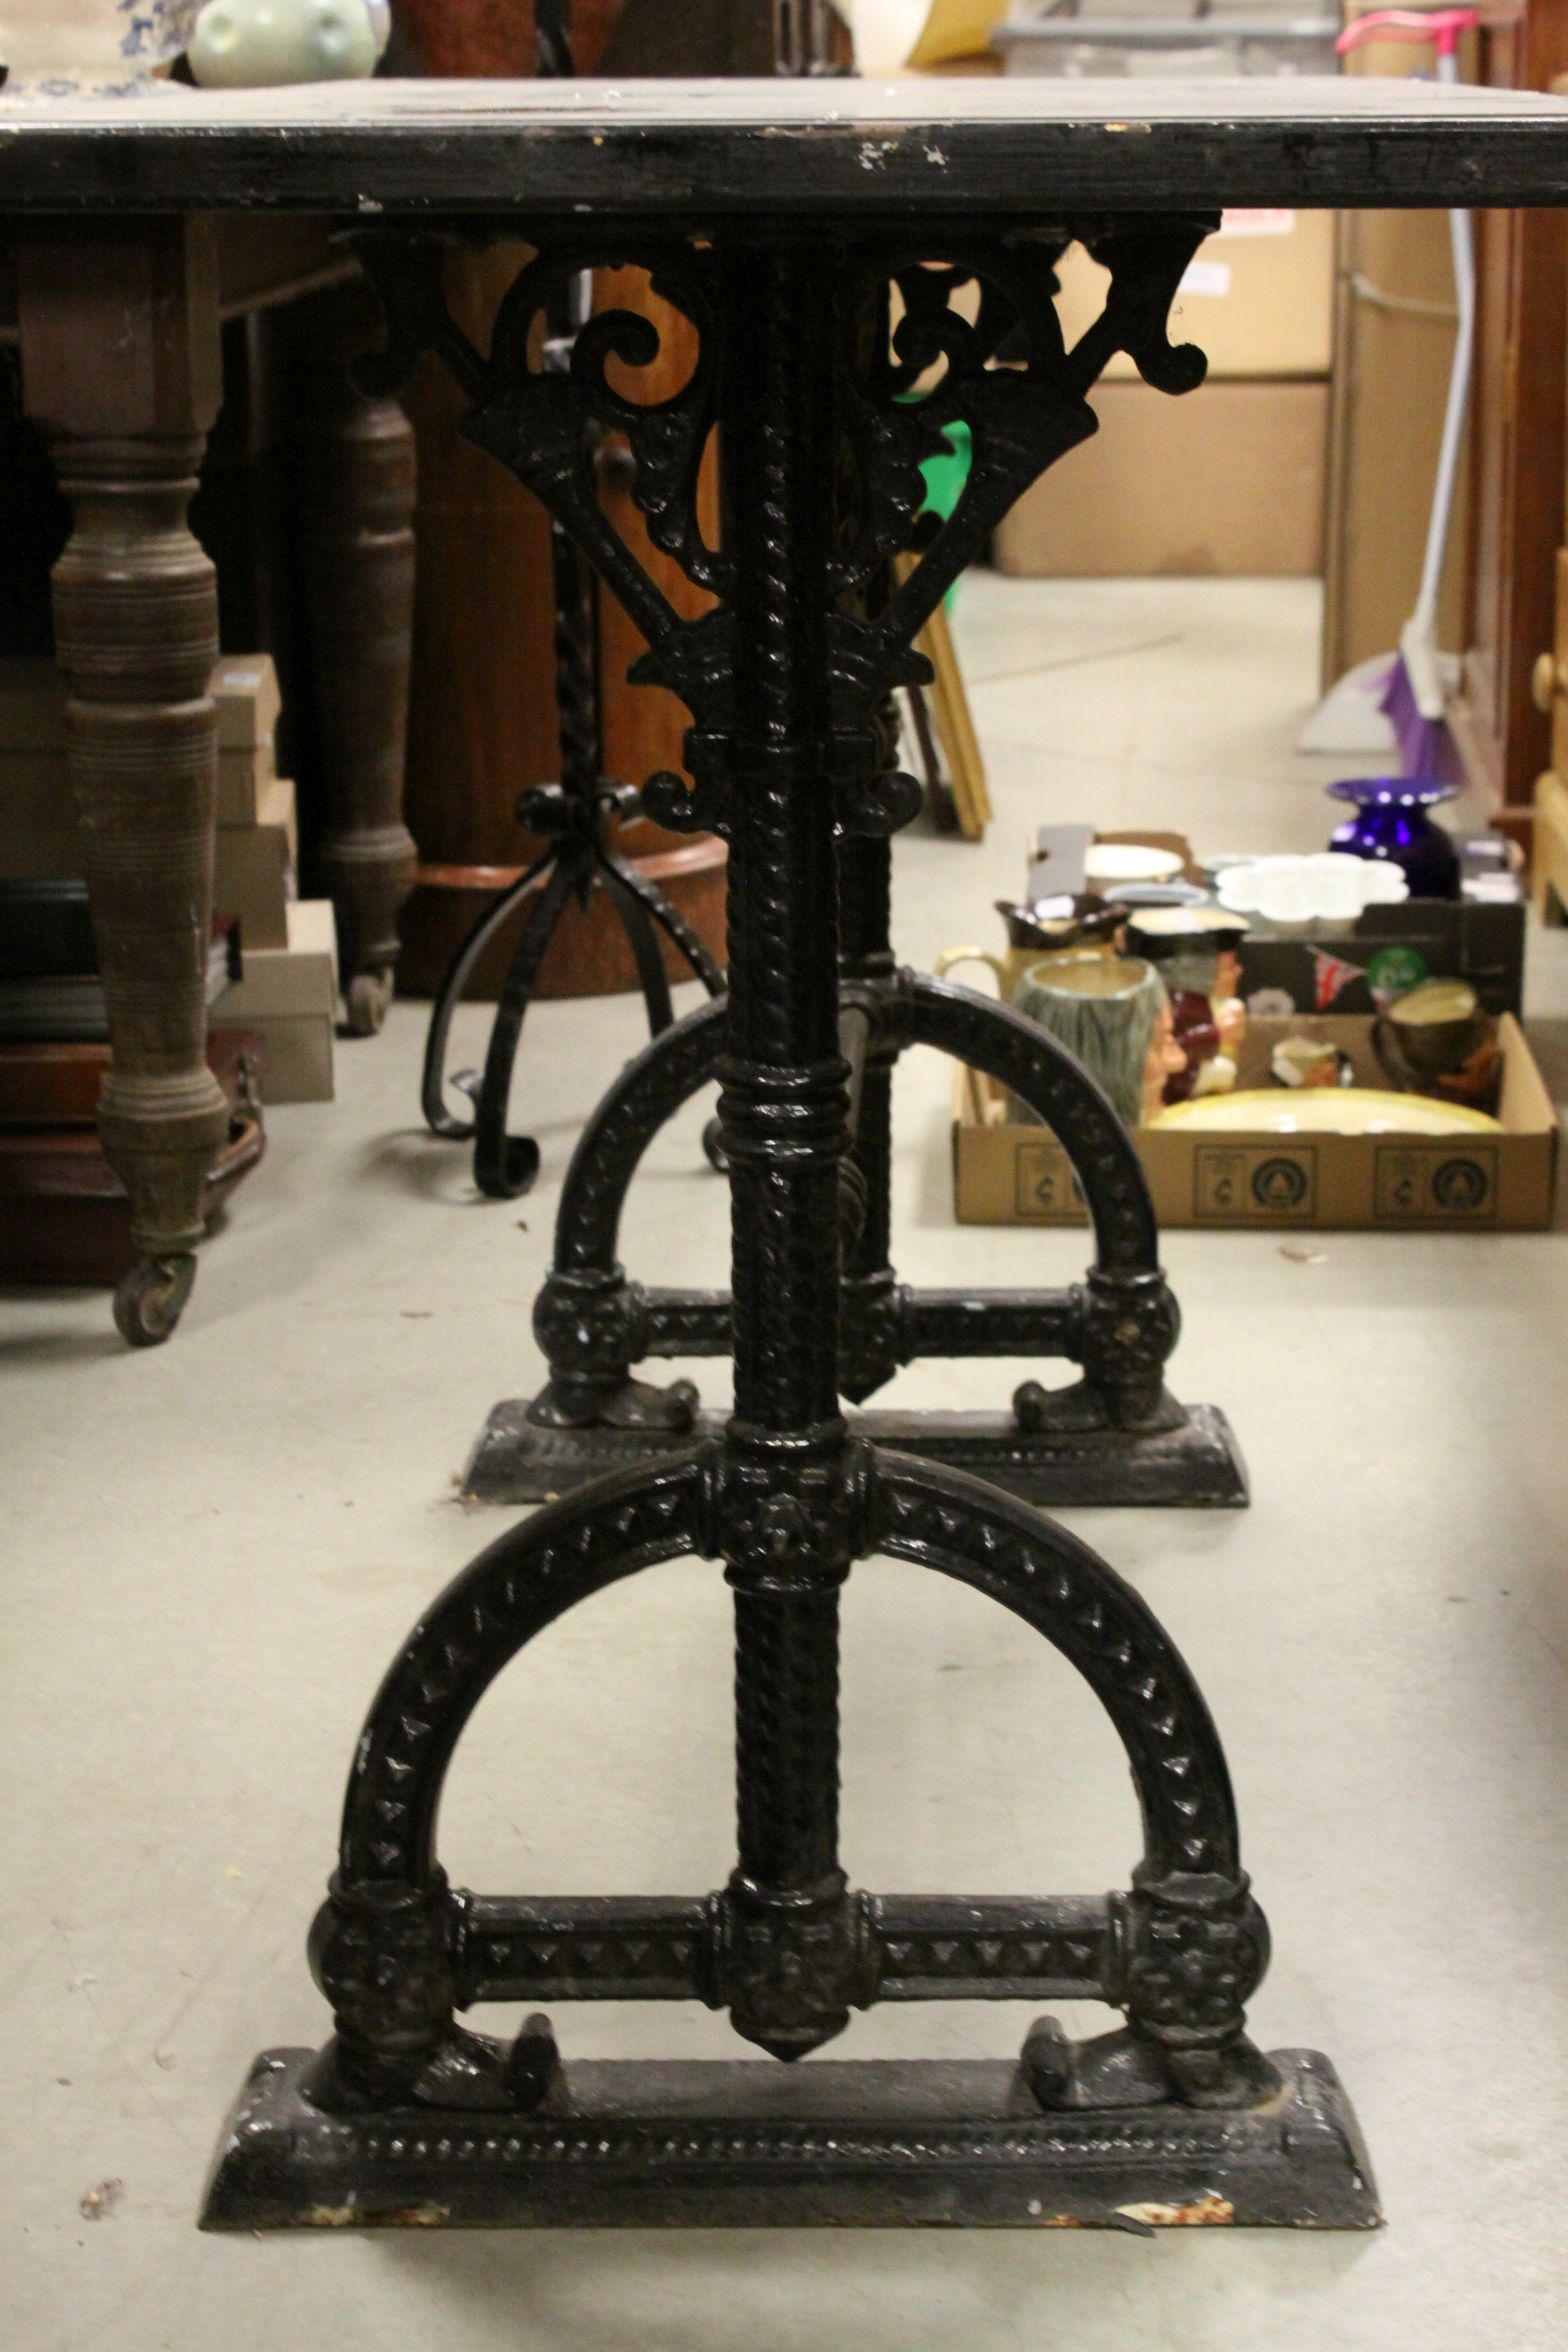 Coalbrookdale Style Garden / Pub Table with Black Glass Inset Top, 117cms x 58cms x 78cms high - Image 9 of 10